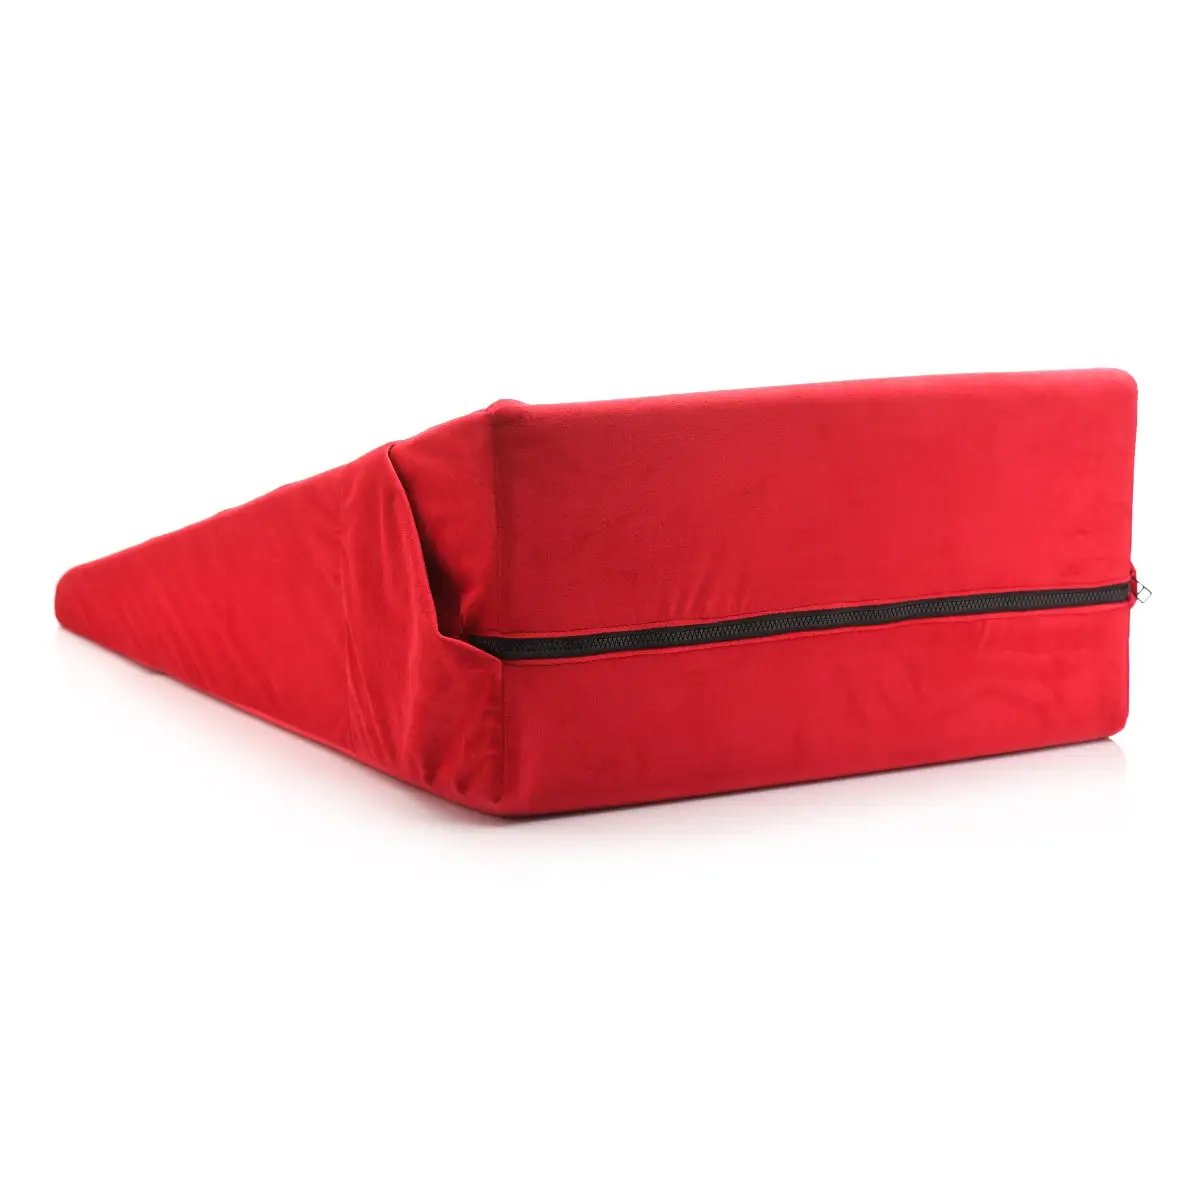 Bedroom Bliss XL Love Cushion Red - Simply Pleasure